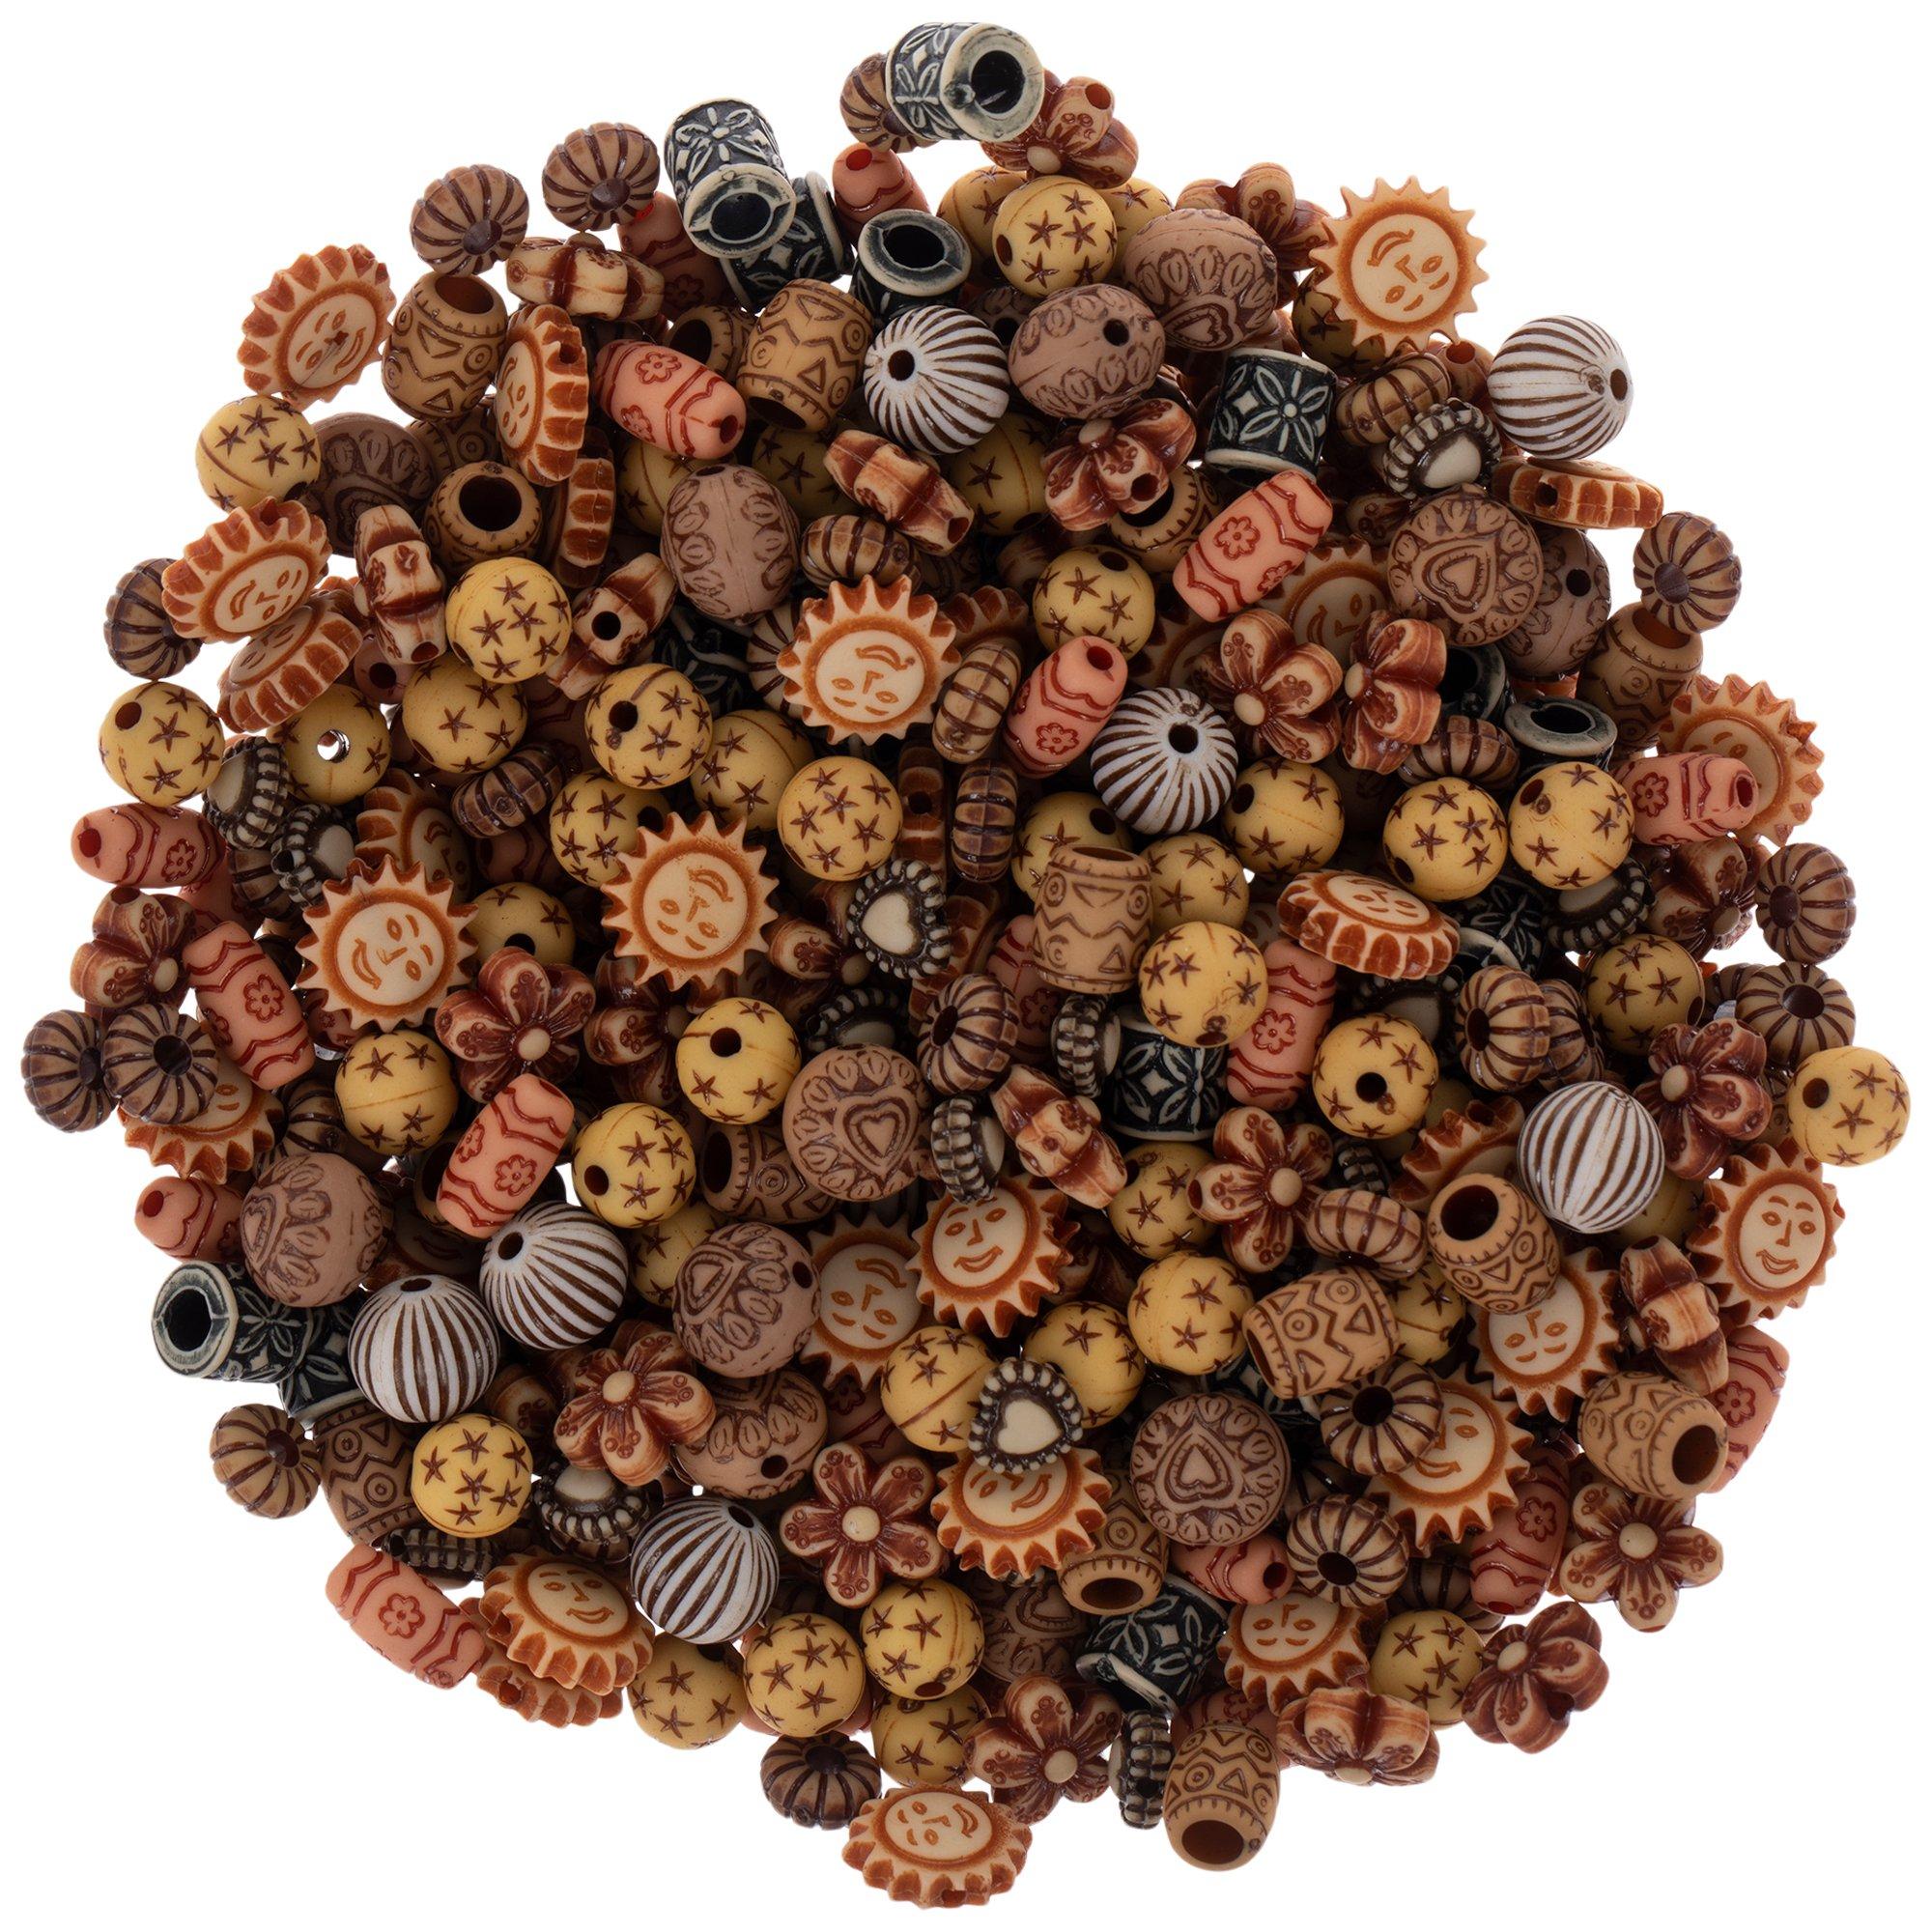 1970's Vintage Mix Wooden Beads /50gm/ Mixed Lot / Natural Wood Beads /wood  Retro Bead. E8-8301226 